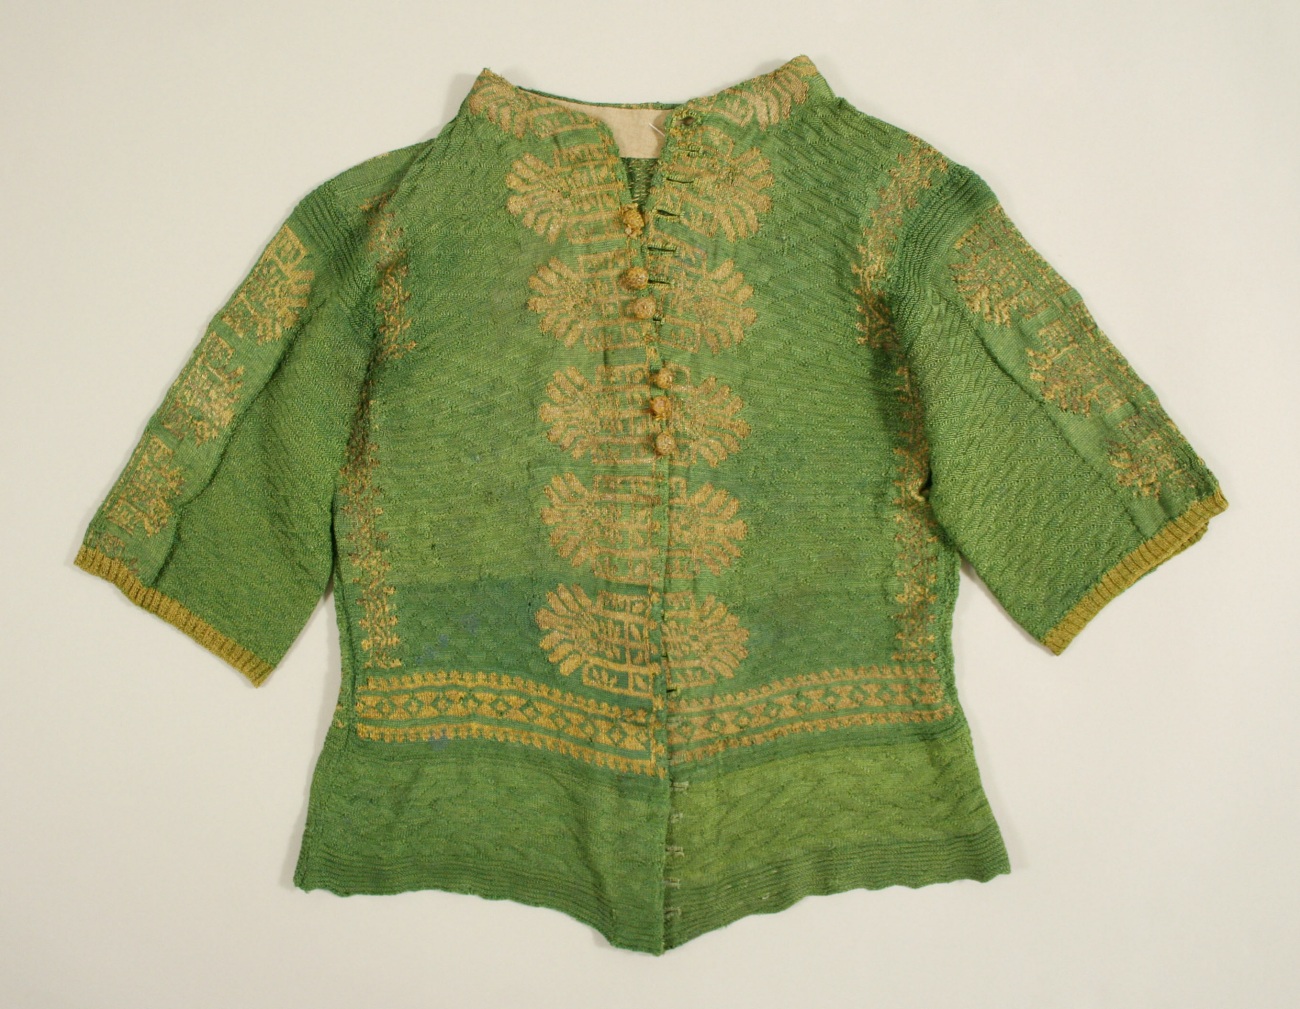 17th century knitted silk sweater